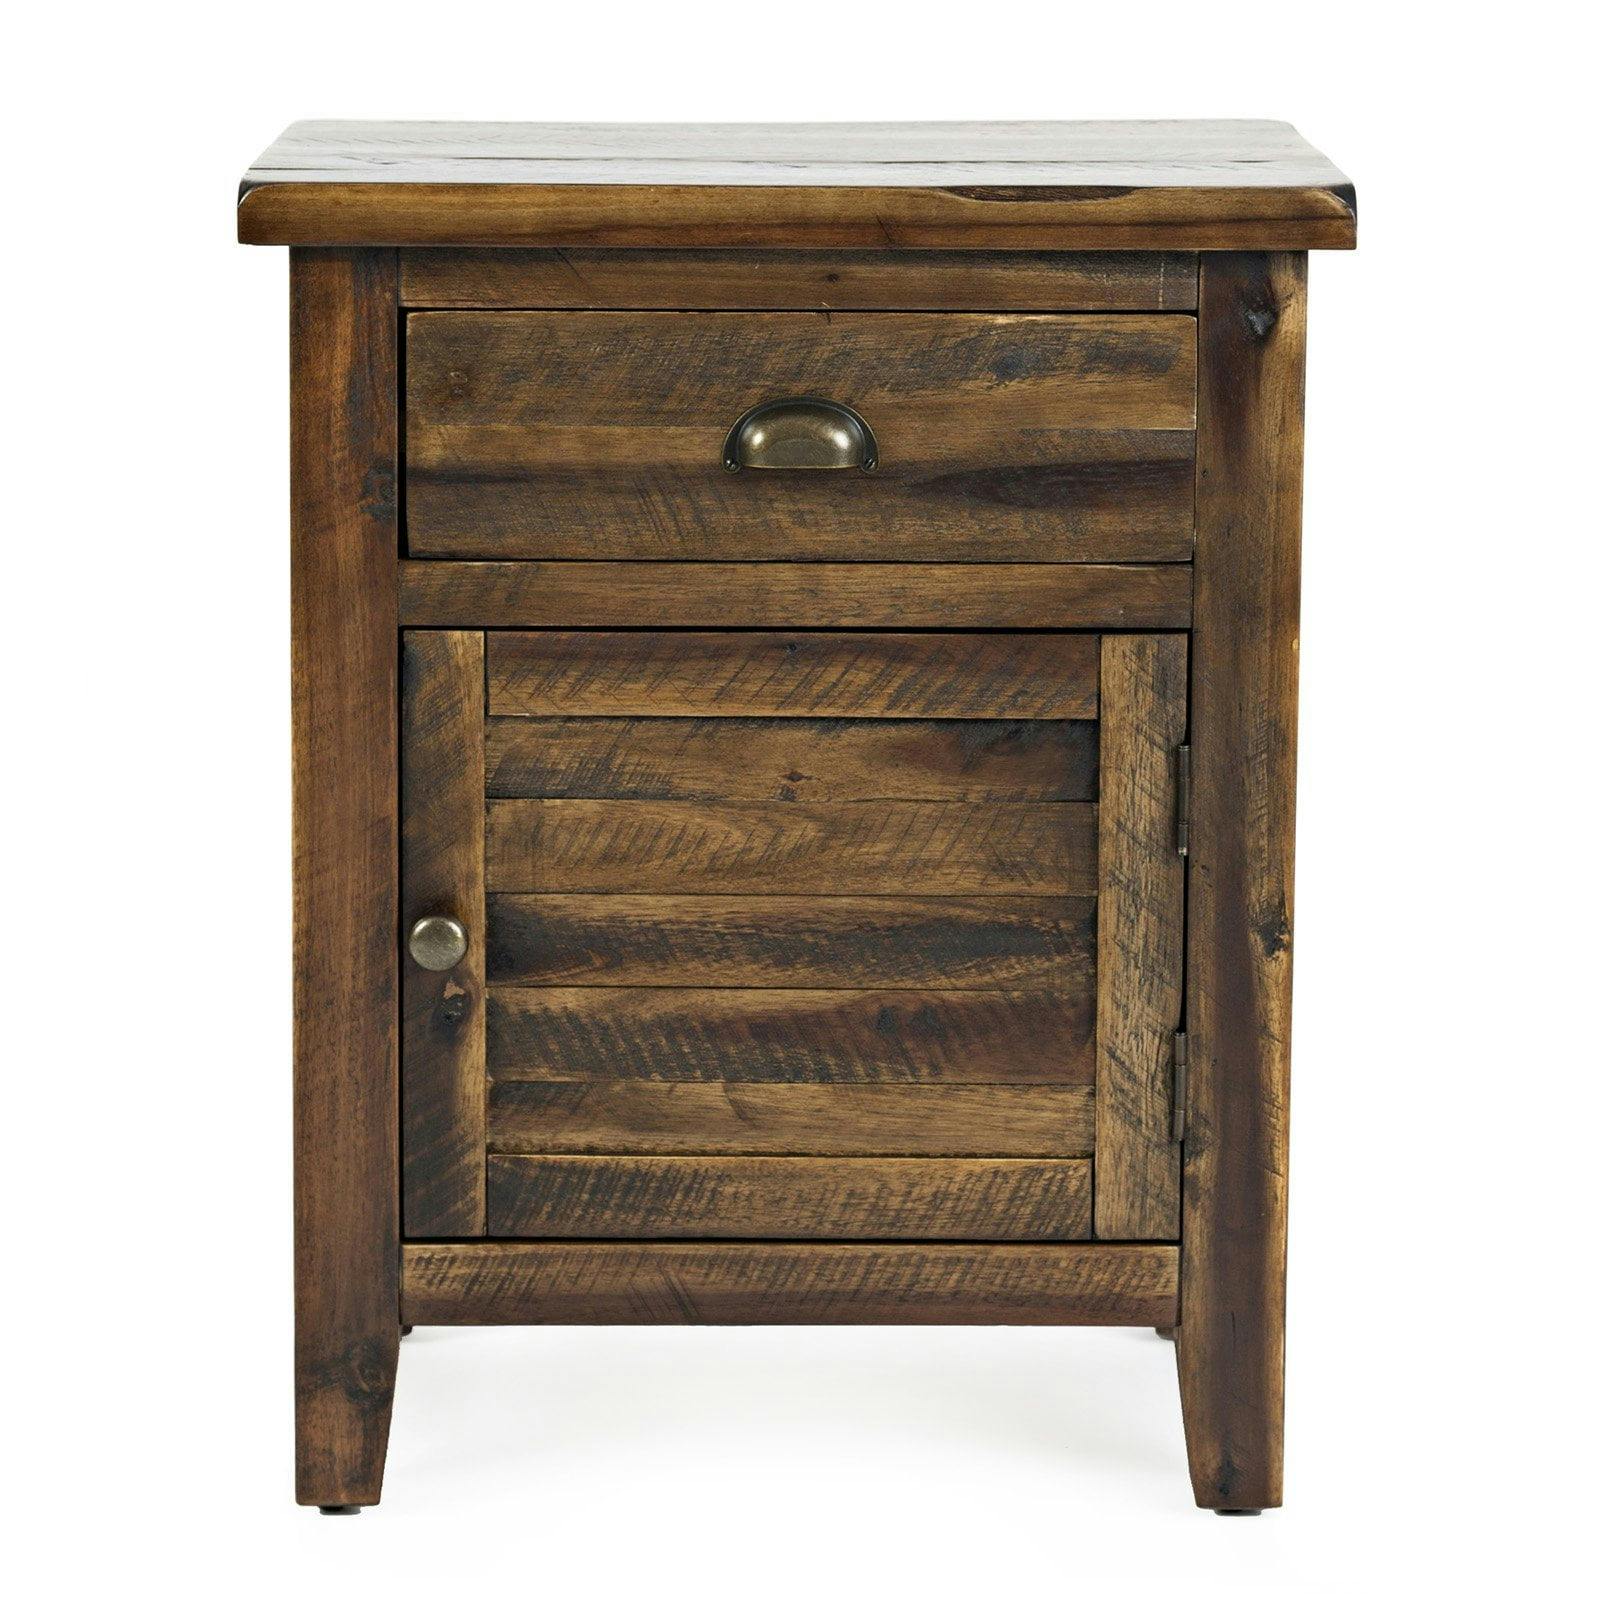 Dakota Oak Rustic Accent Table with Storage Drawer